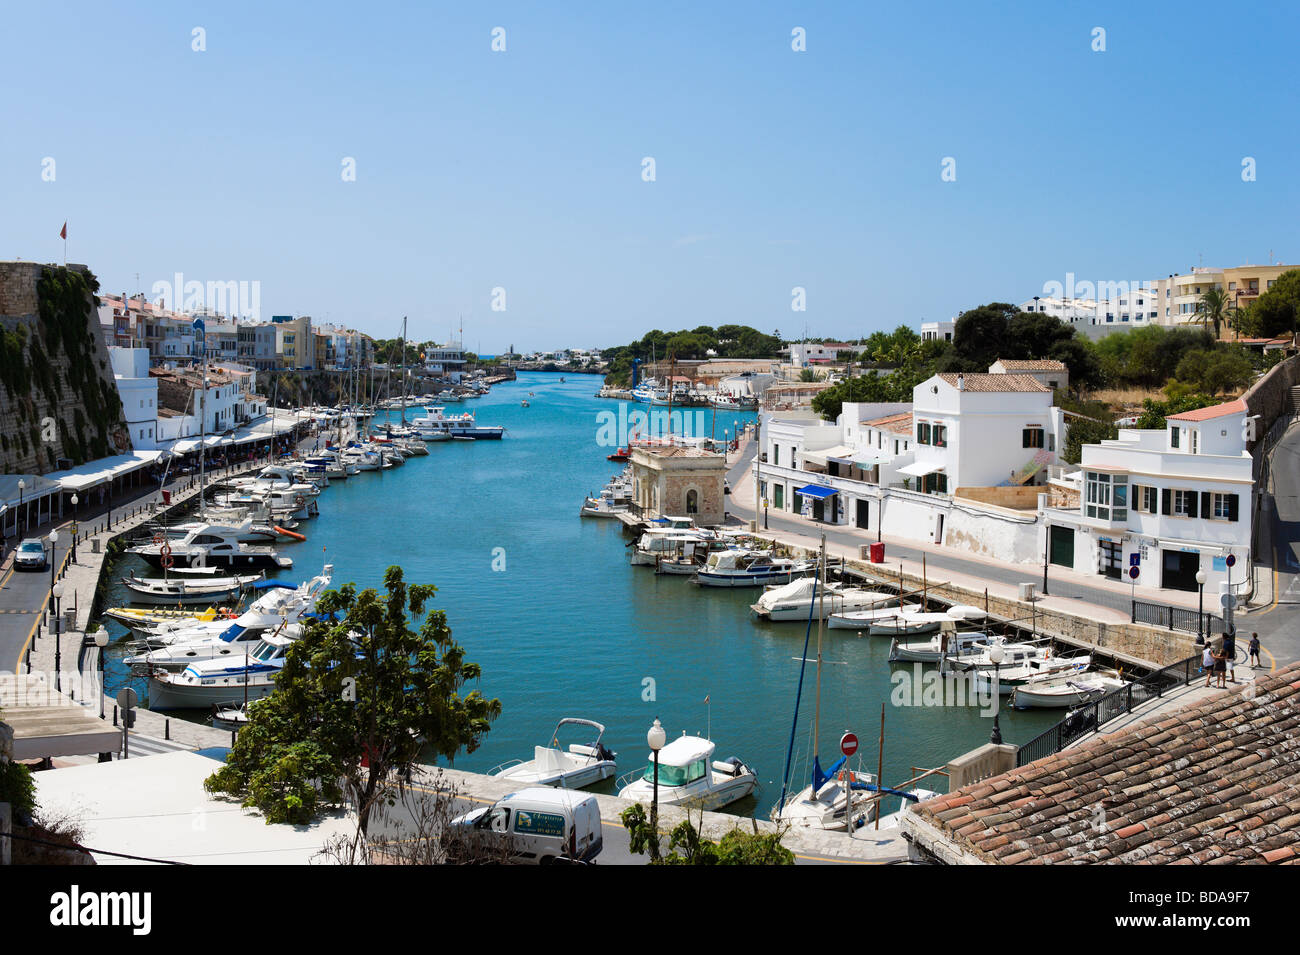 View over the harbour in the old town of Ciutadella (Ciudadela), Menorca, Balearic Islands, Spain Stock Photo